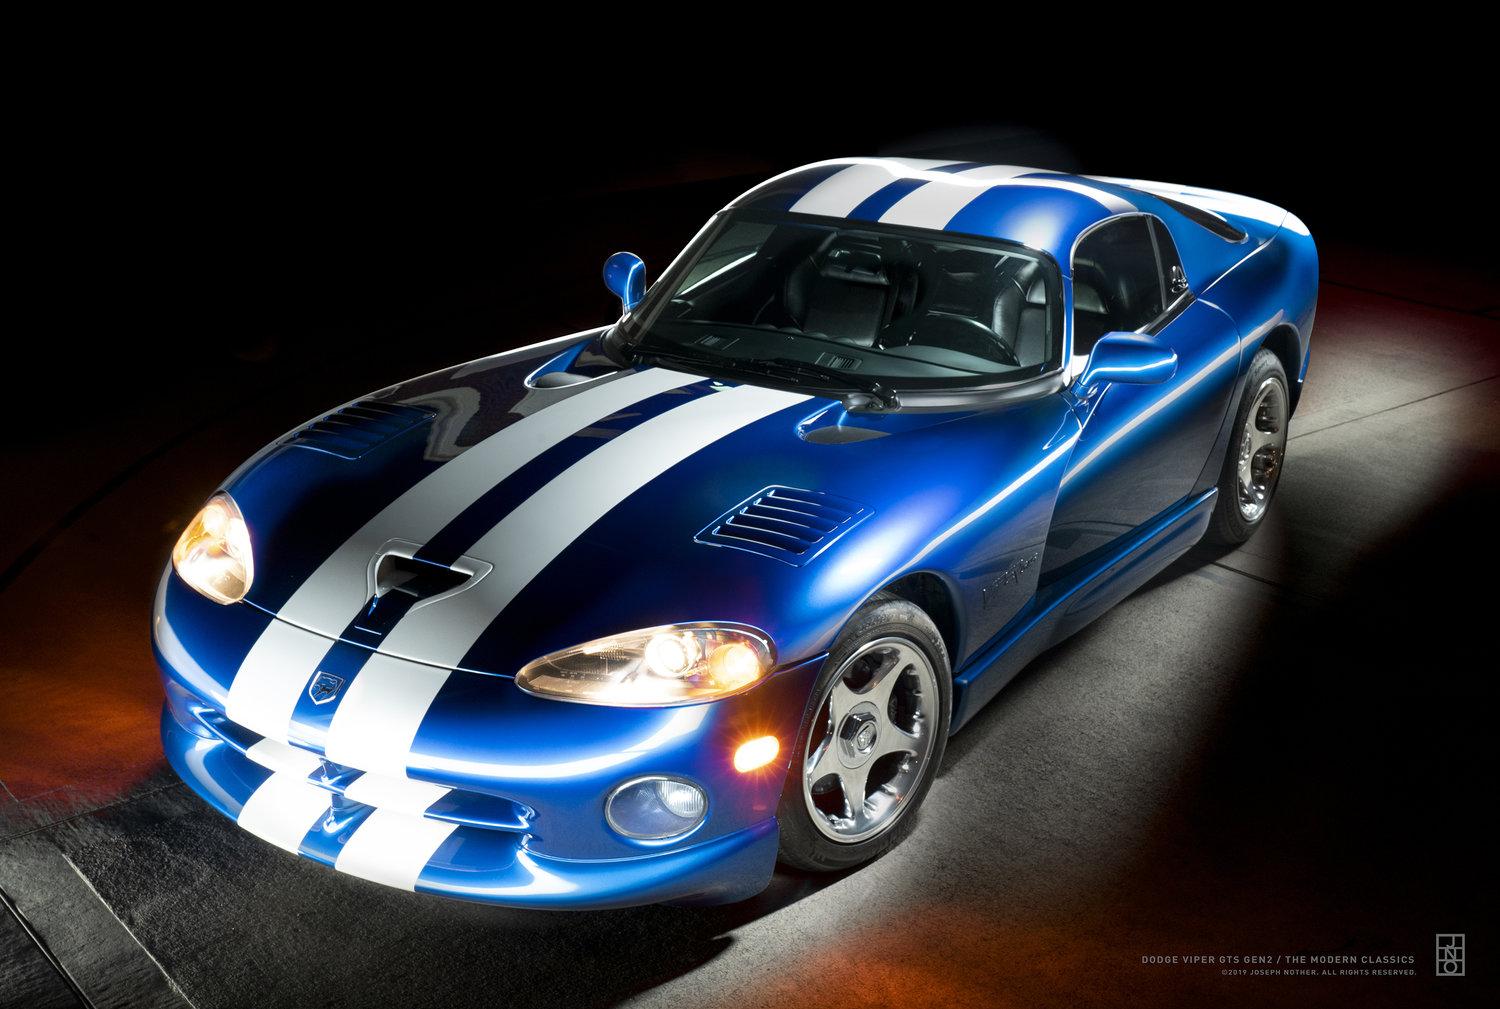 Dodge Viper Gts Gen Hero Limited Edition Joseph Nother